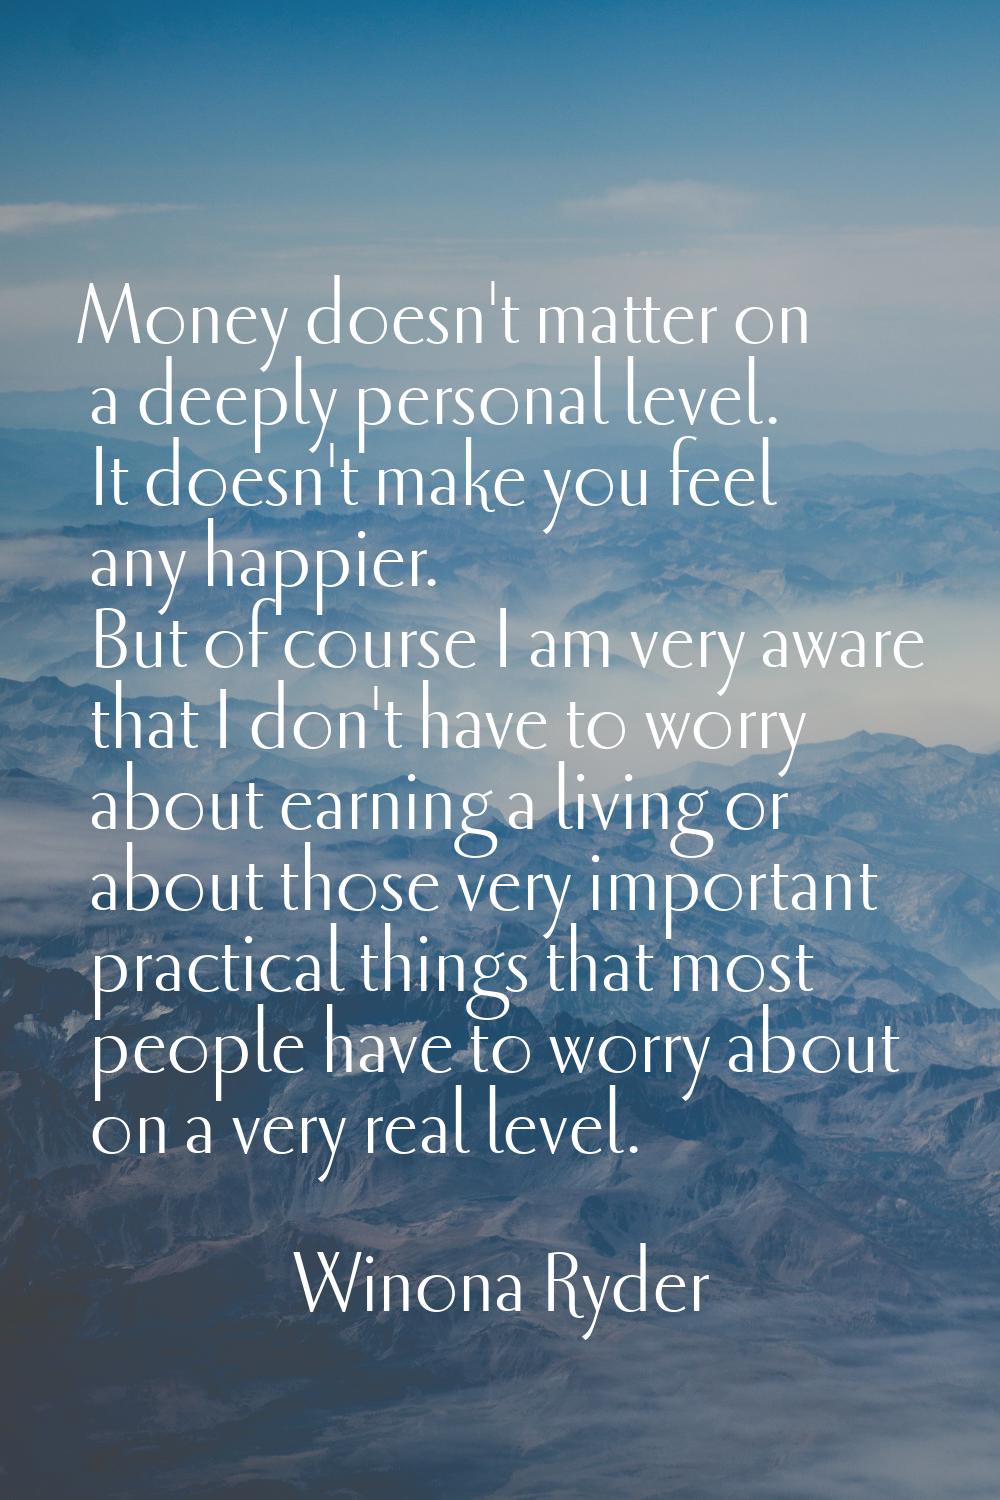 Money doesn't matter on a deeply personal level. It doesn't make you feel any happier. But of cours